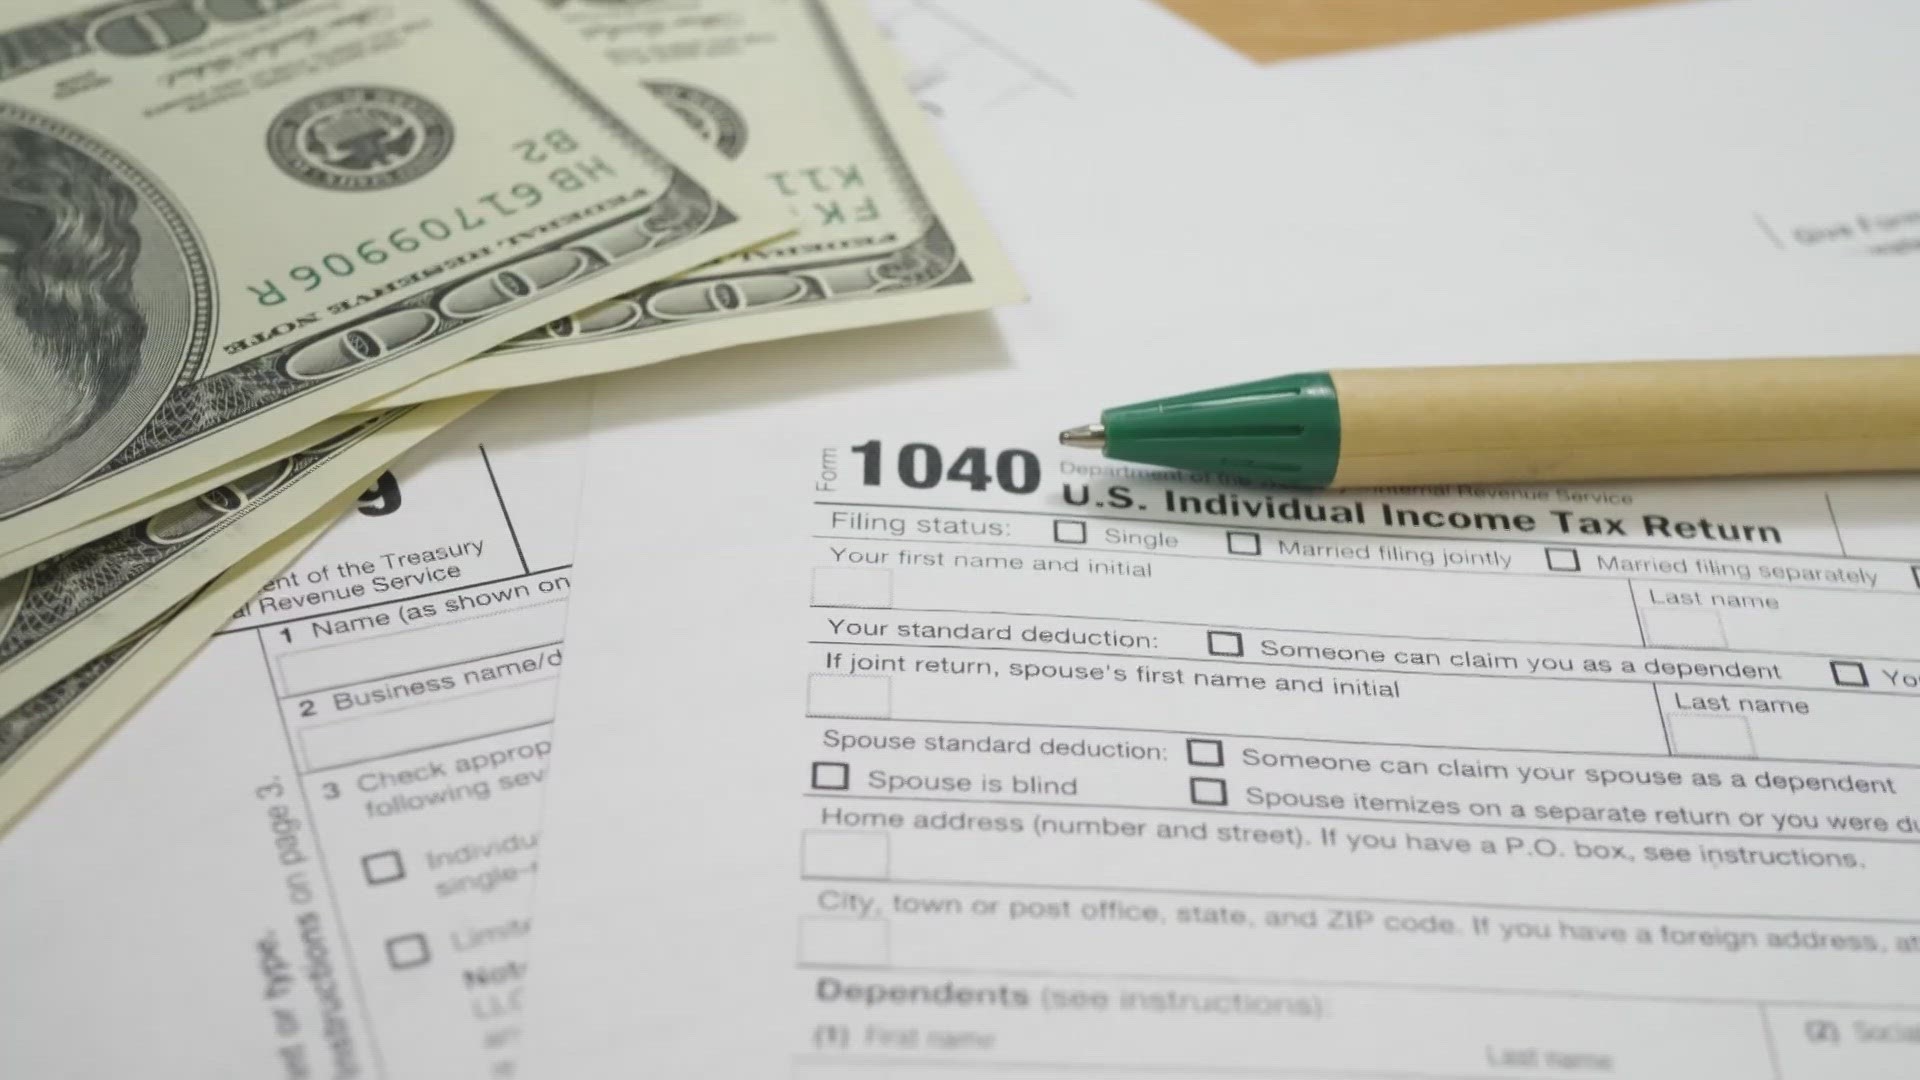 In today's Business Brief, Ryan Frazier breaks down how you could file your taxes for free, if you're eligible.